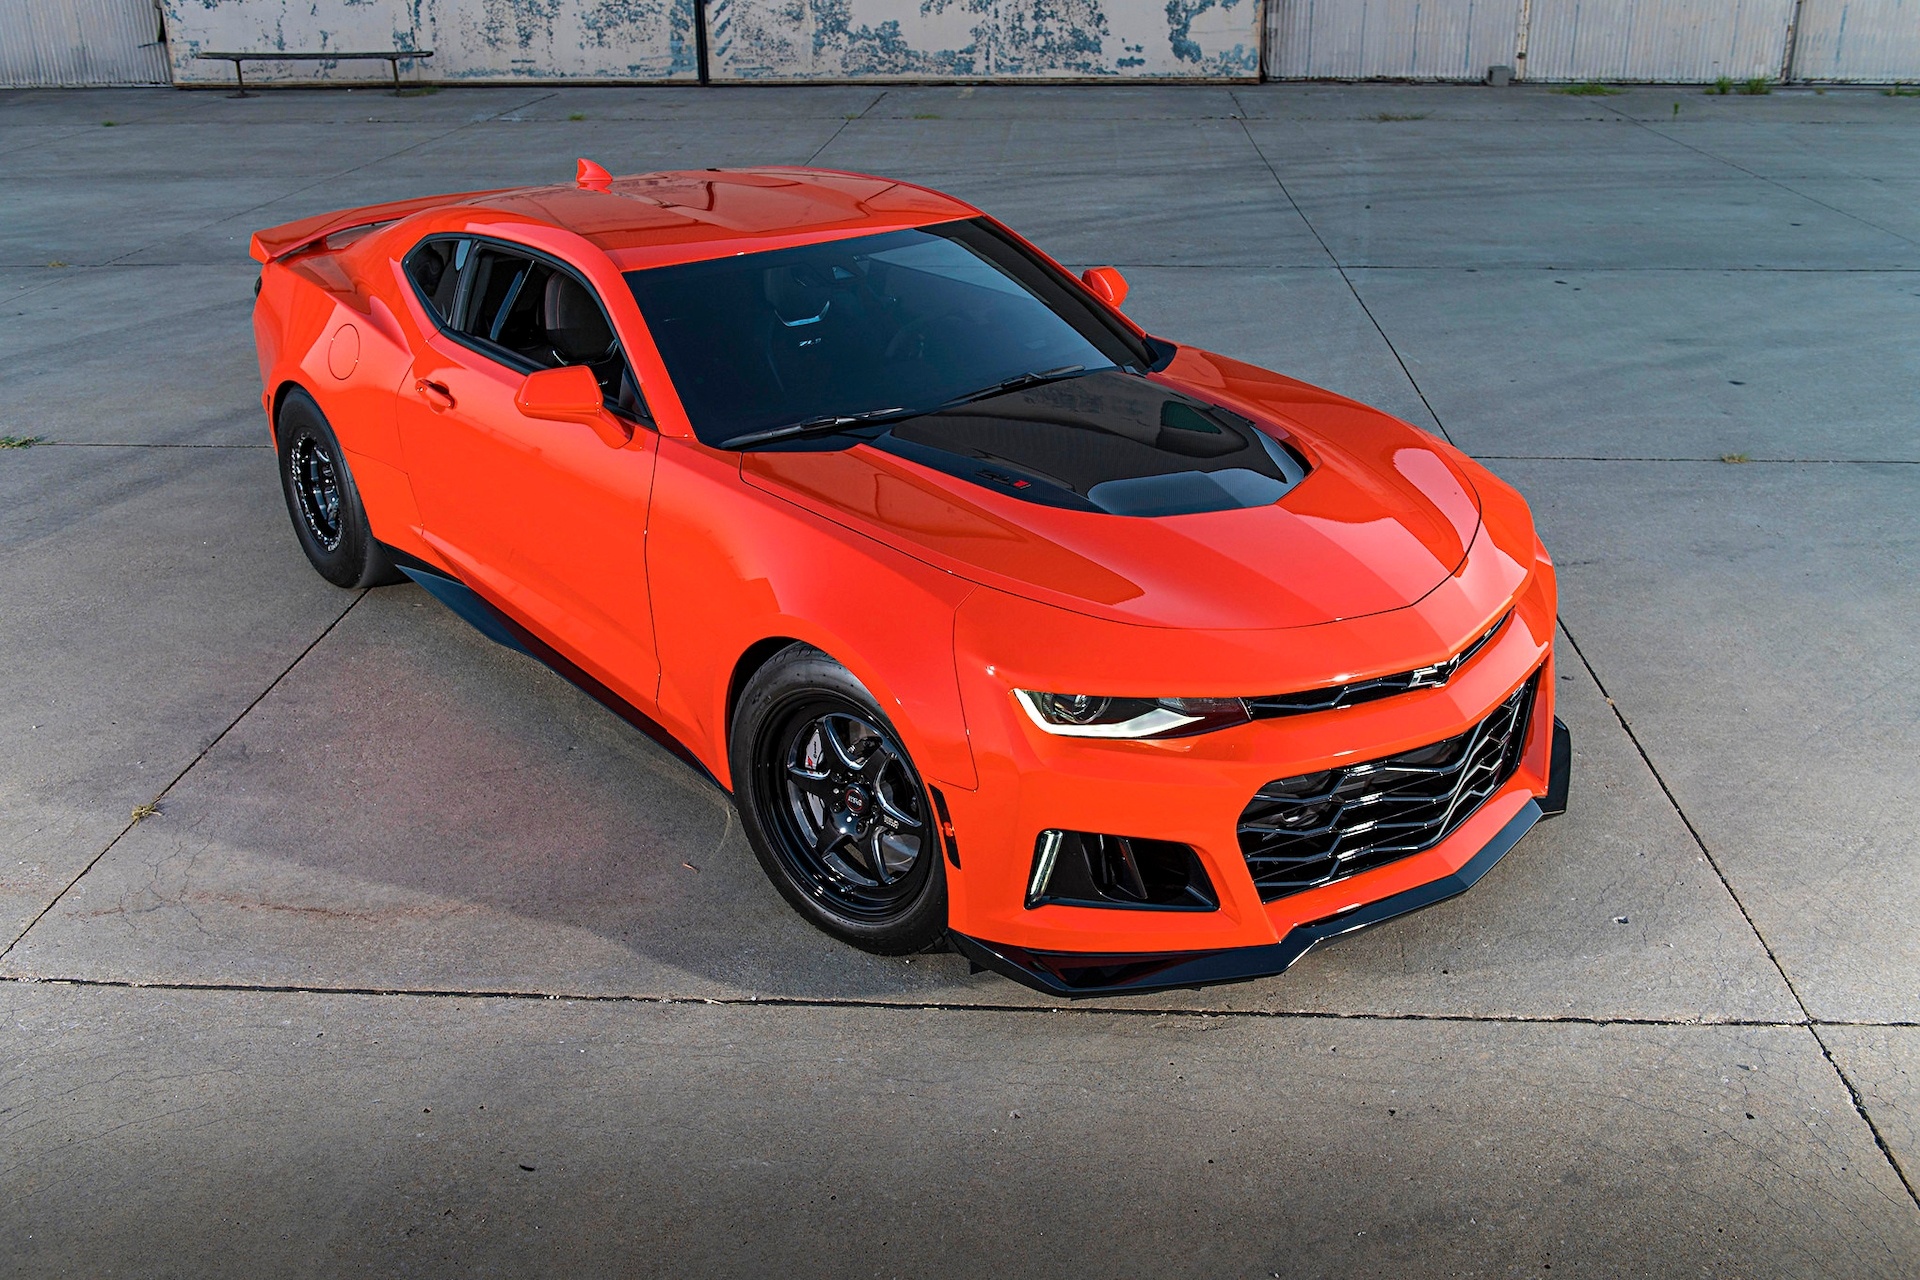 2019 Camaro ZL1, Record-breaking performance, Powerful LT4 blower, Muscle car legend, Attention to detail, 1920x1280 HD Desktop